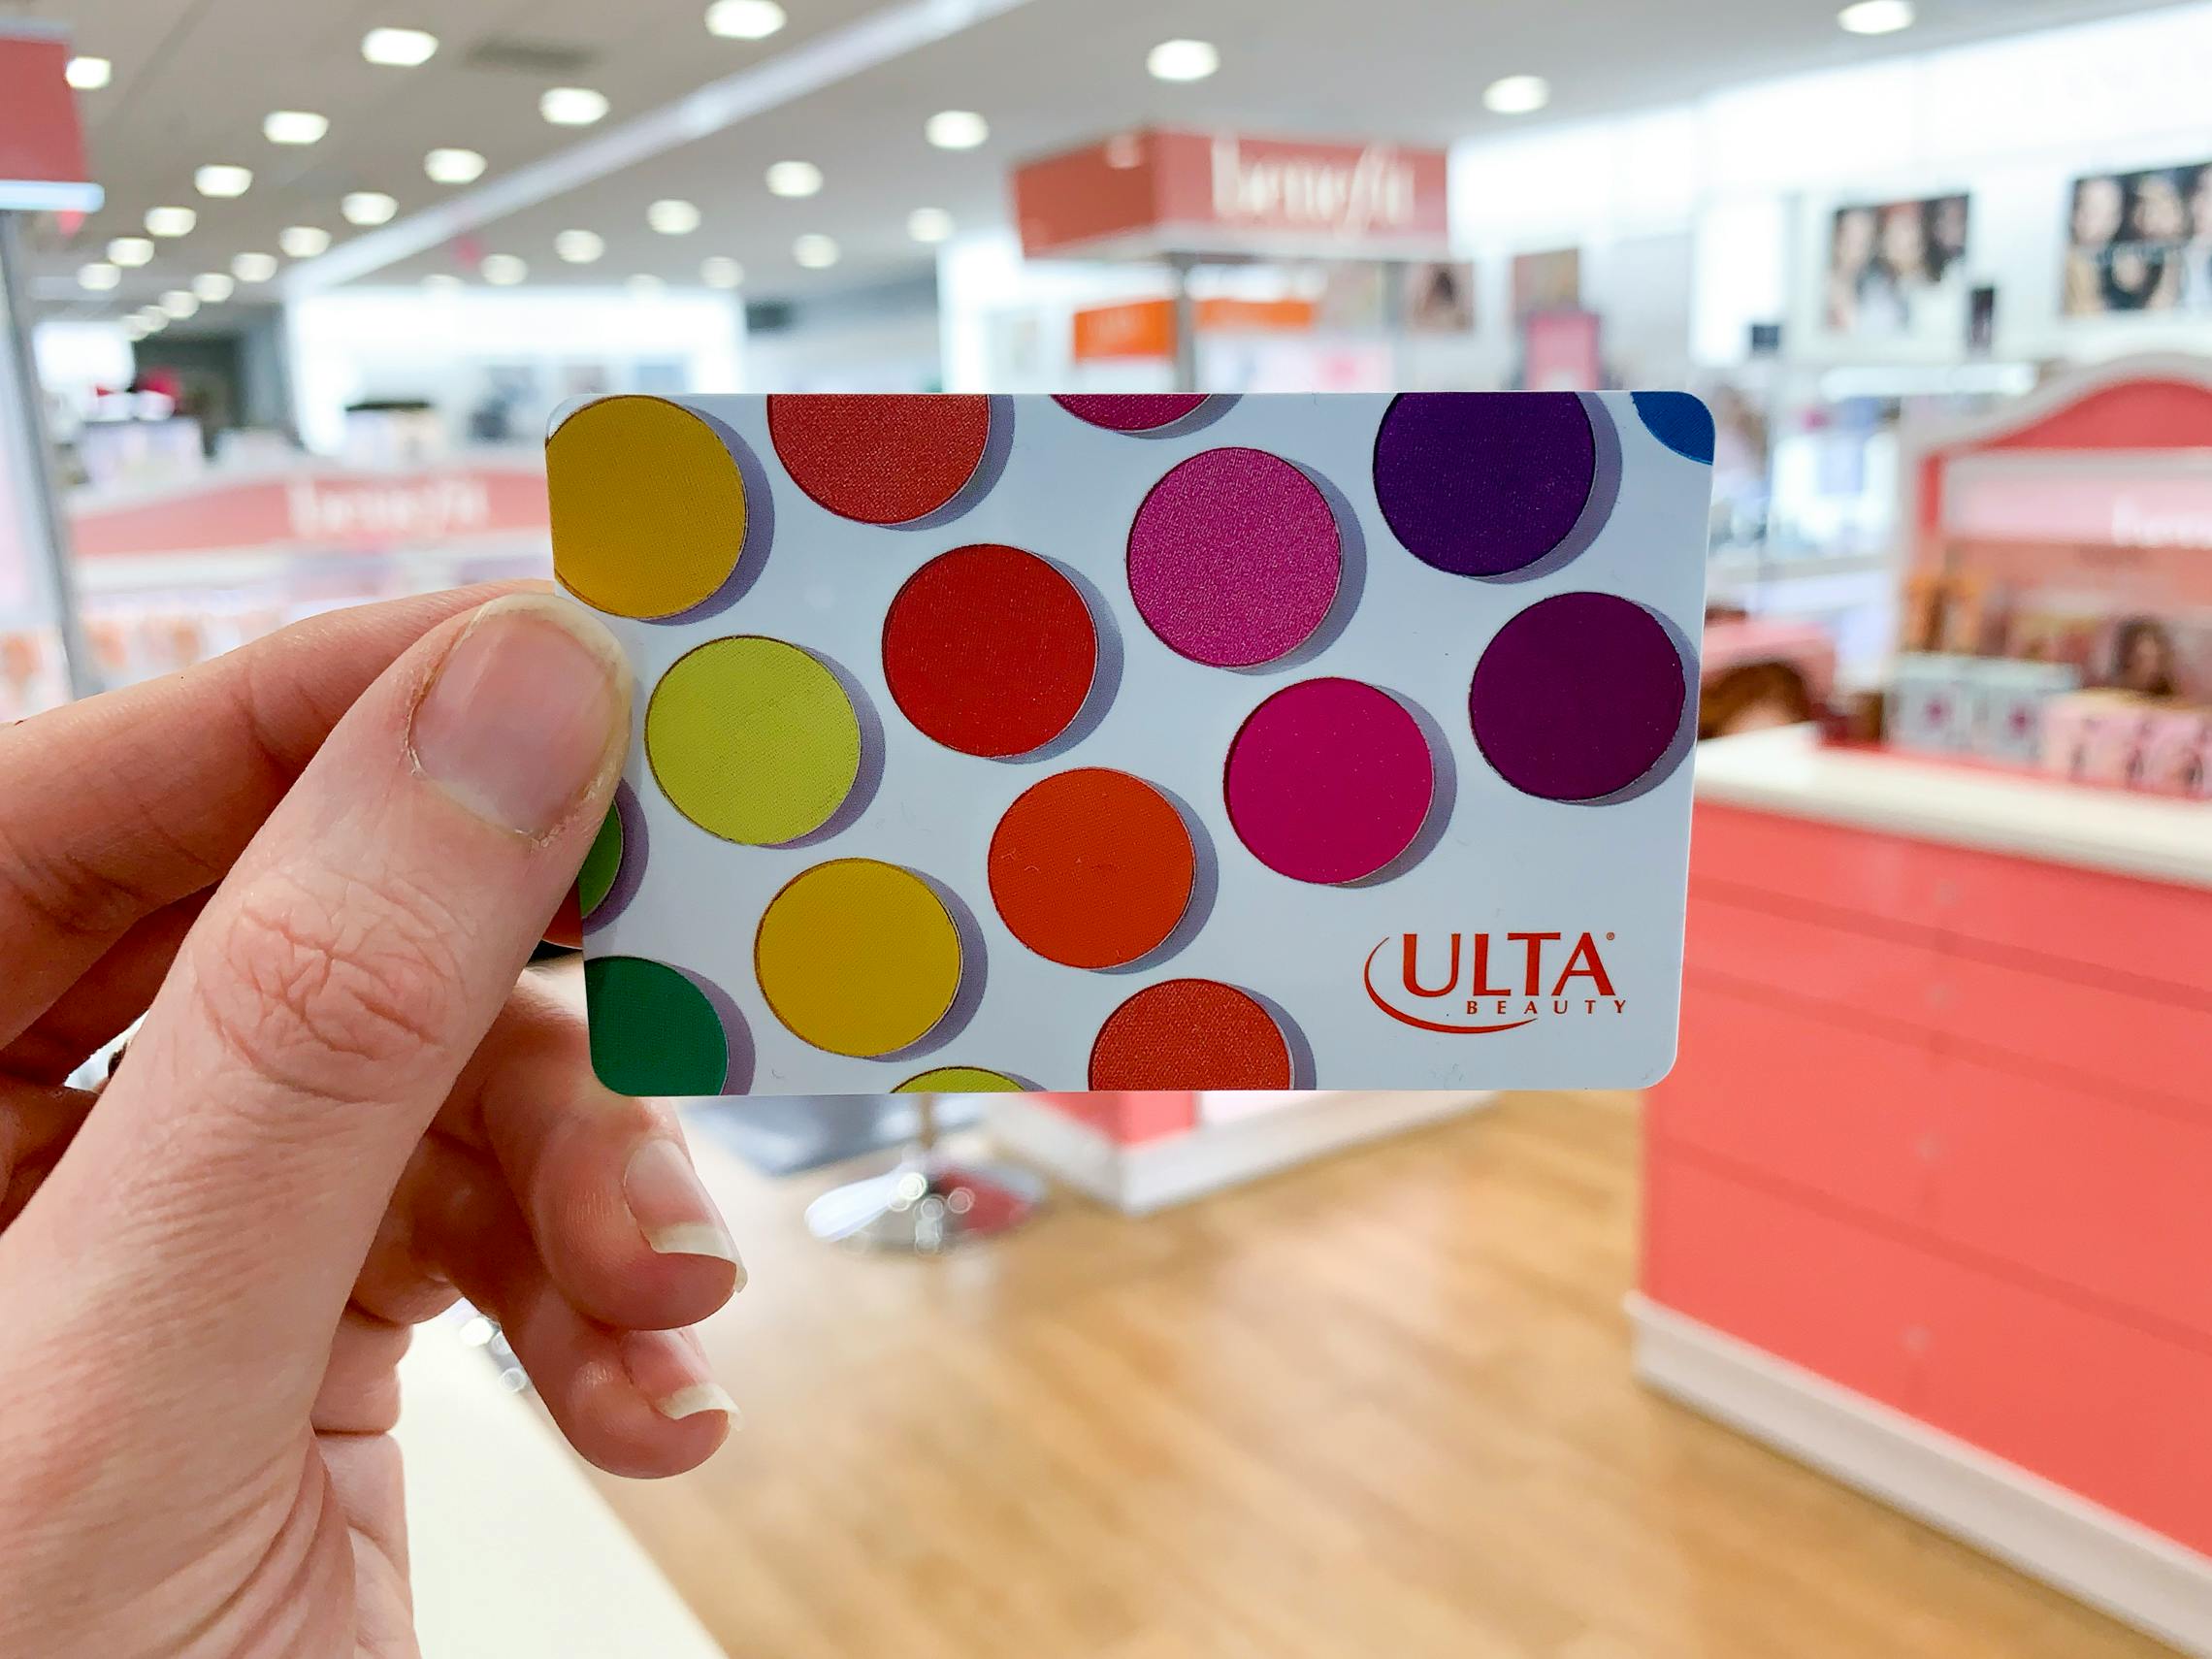 An Ulta gift card held up in store.